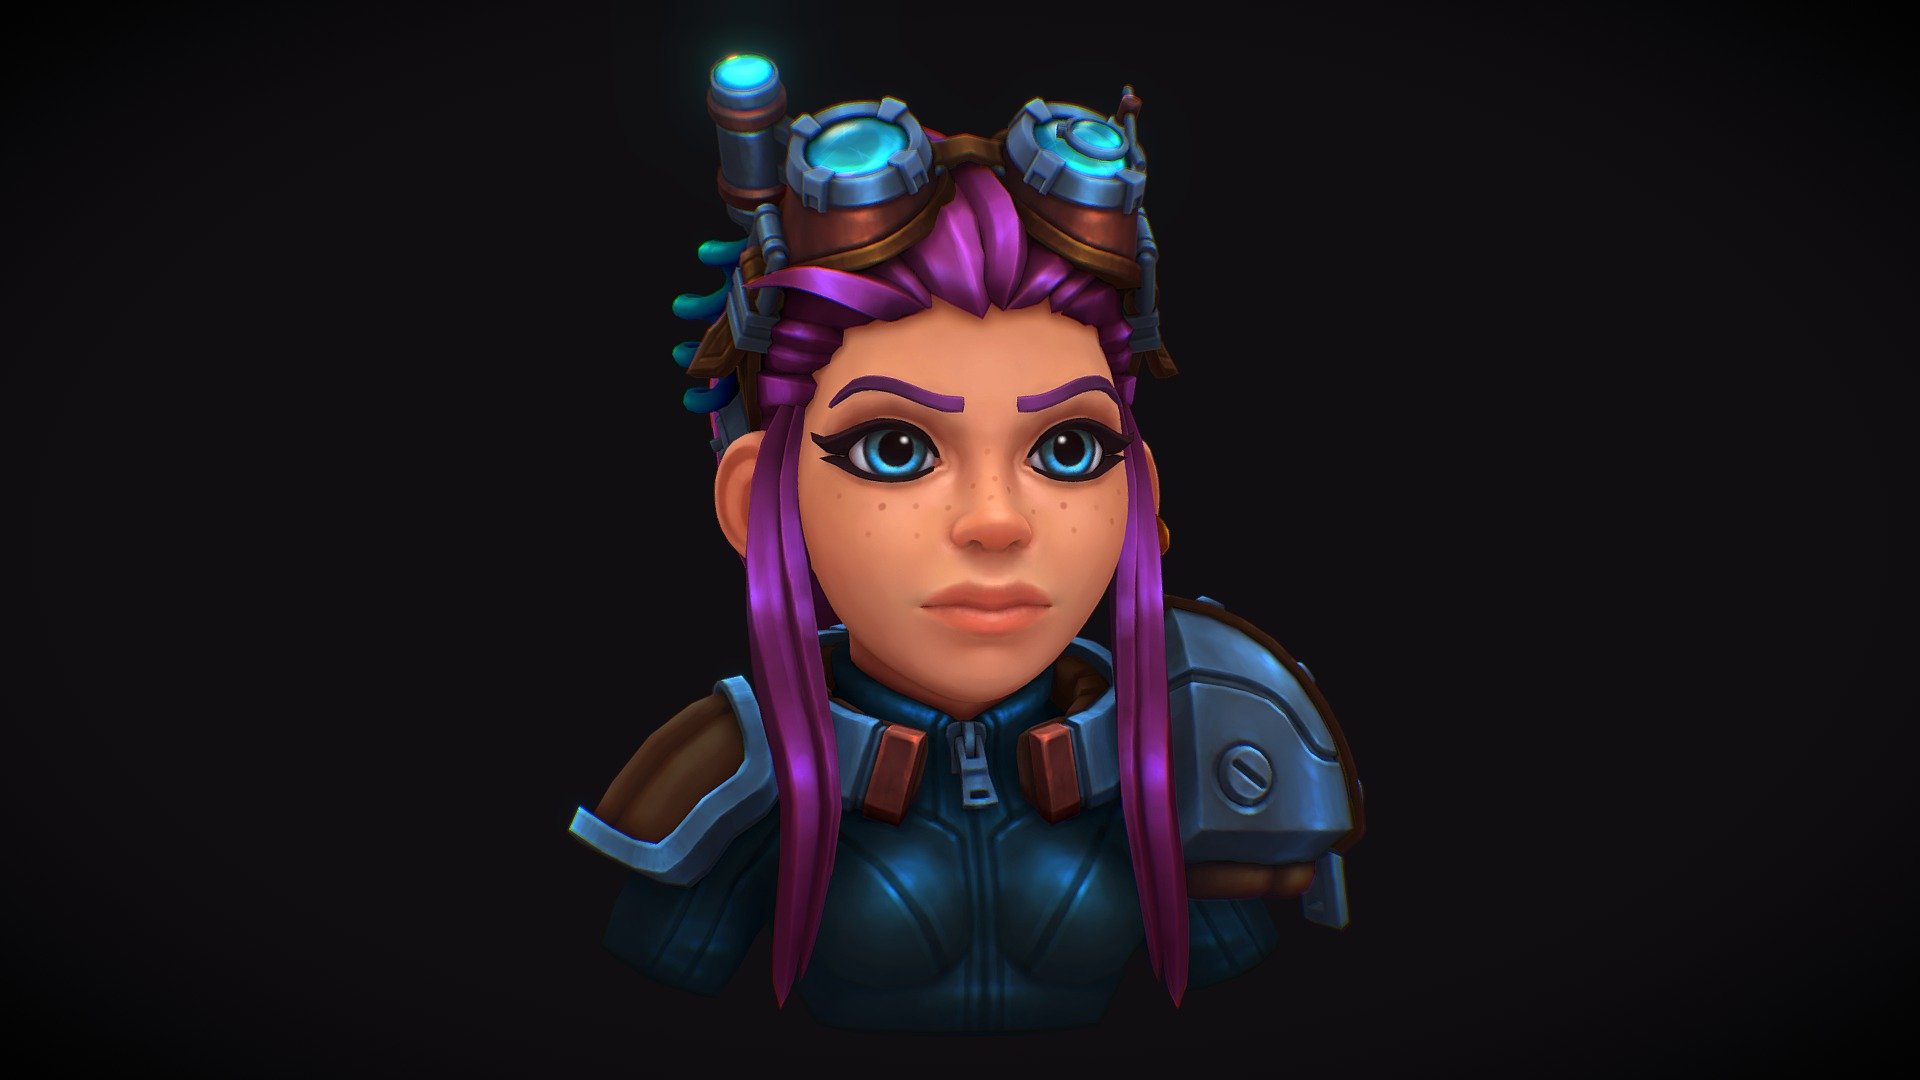 Here's my submission for the #3dBustChallenge: Zoe, the Gnome Engineer :) 
https://www.artstation.com/artwork/A9lNgX
I was super excited when I found out about Katia Bourykina's challenge in partnership with Sketchfab, so I had to give it a try!
The design is my own, slightly inspired by WoW gnomes :P  

Hope you like her! - Zoe, the Gnome Engineer - #3dBustChallenge - 3D model by bernardo cristovao (@bernardocristovao) 3d model